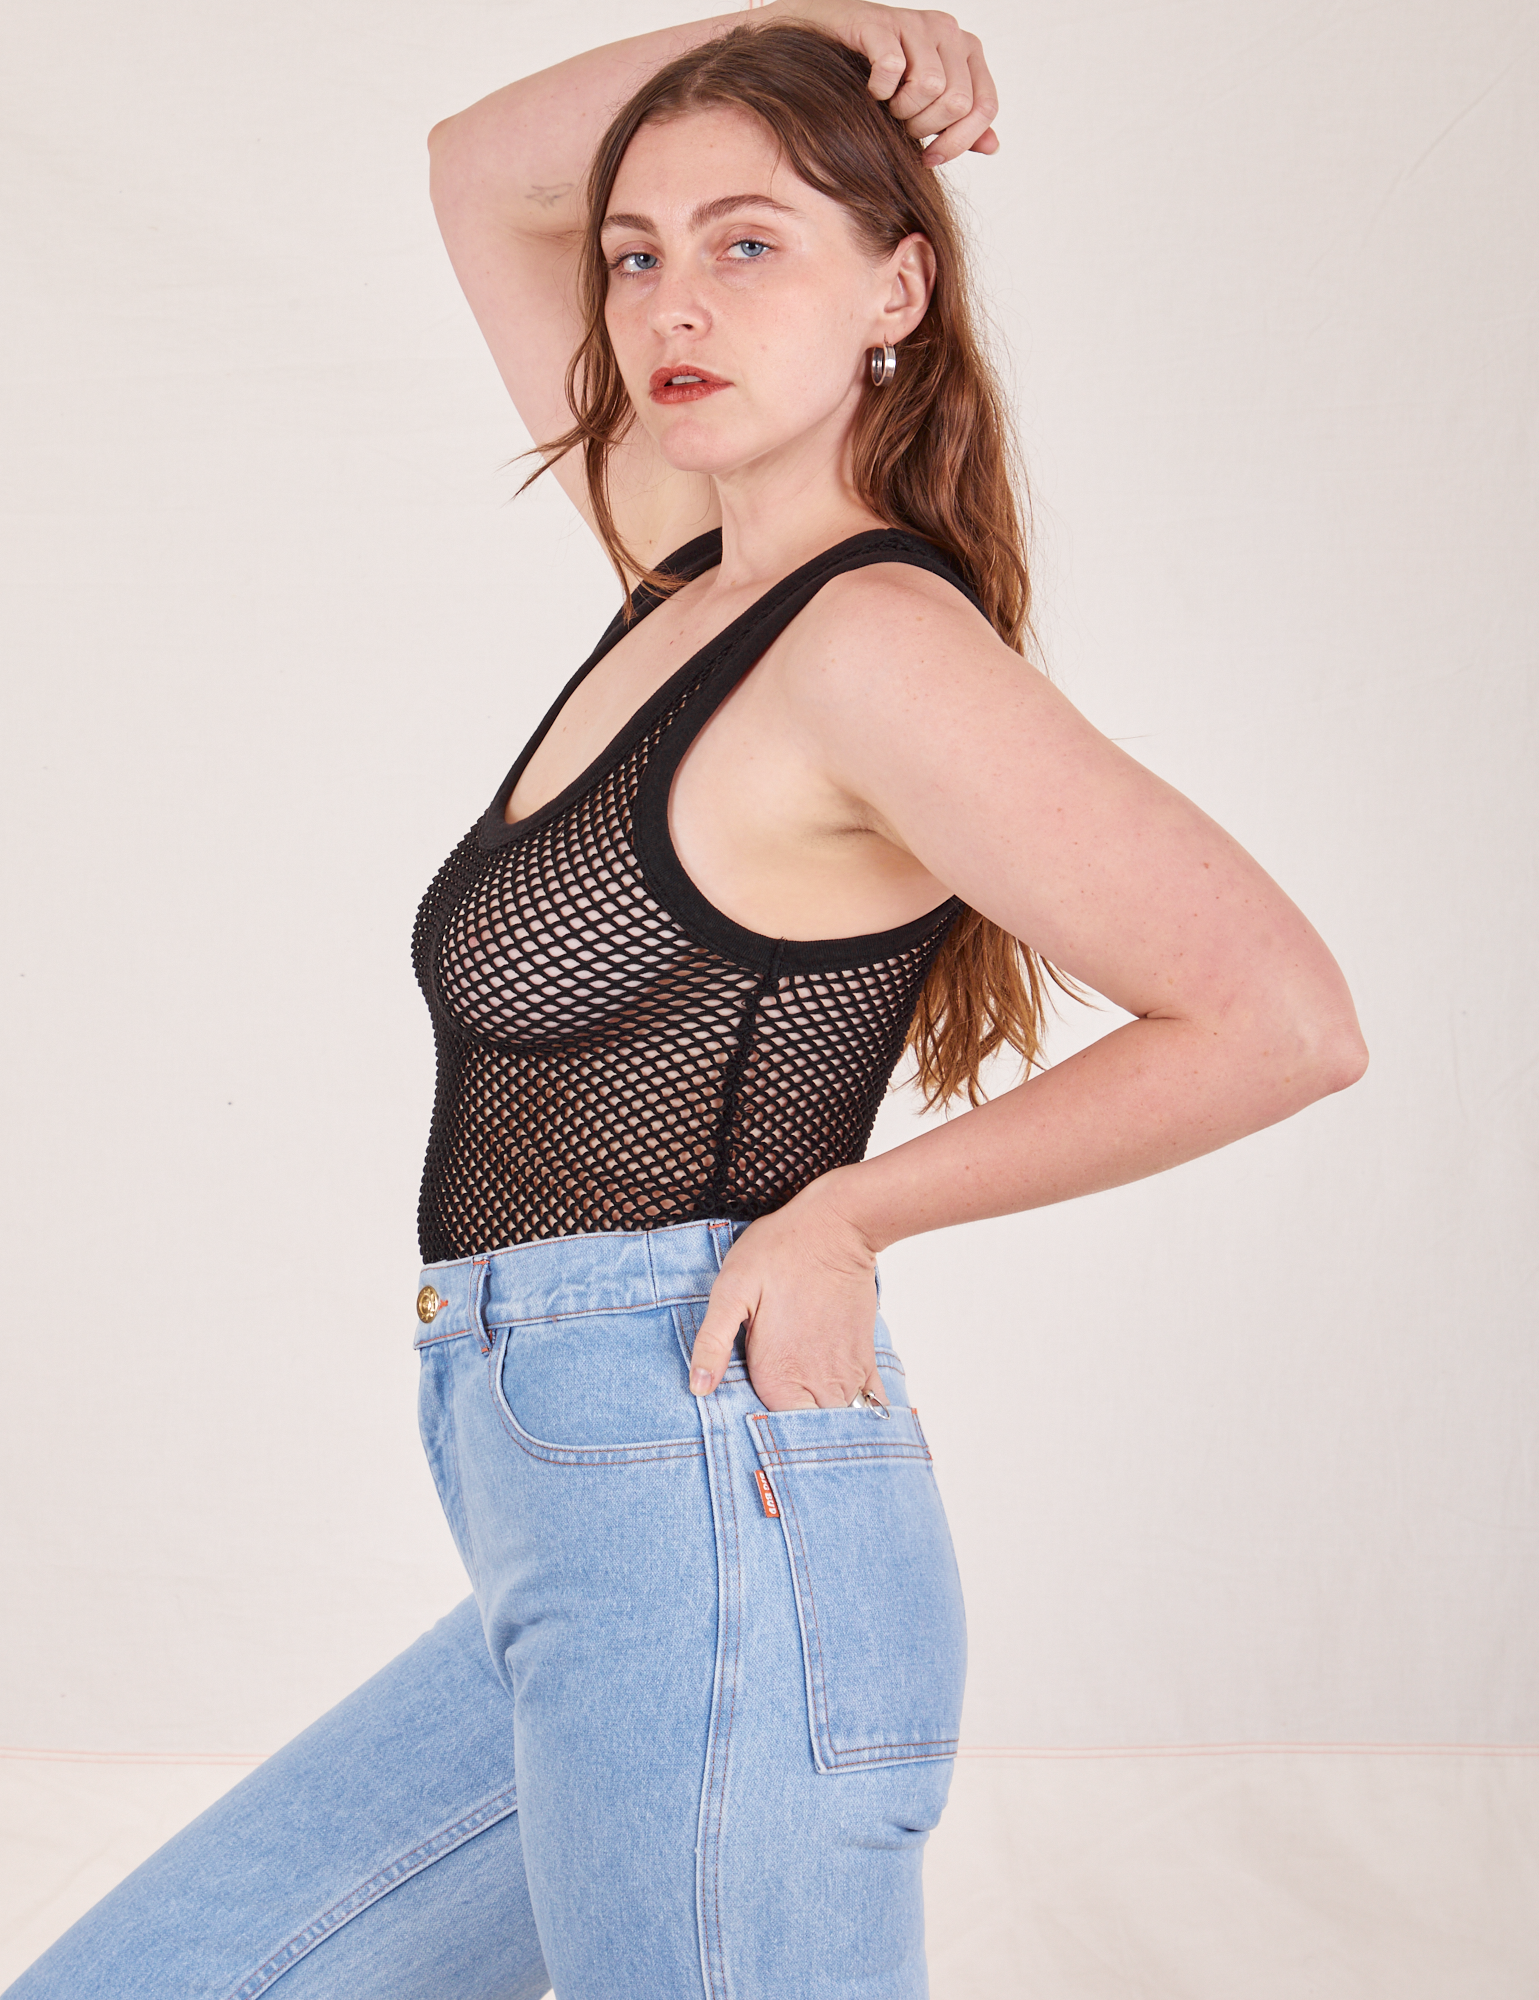 Side view of Mesh Tank Top in Basic Black and light wash Sailor Jeans worn by Allison